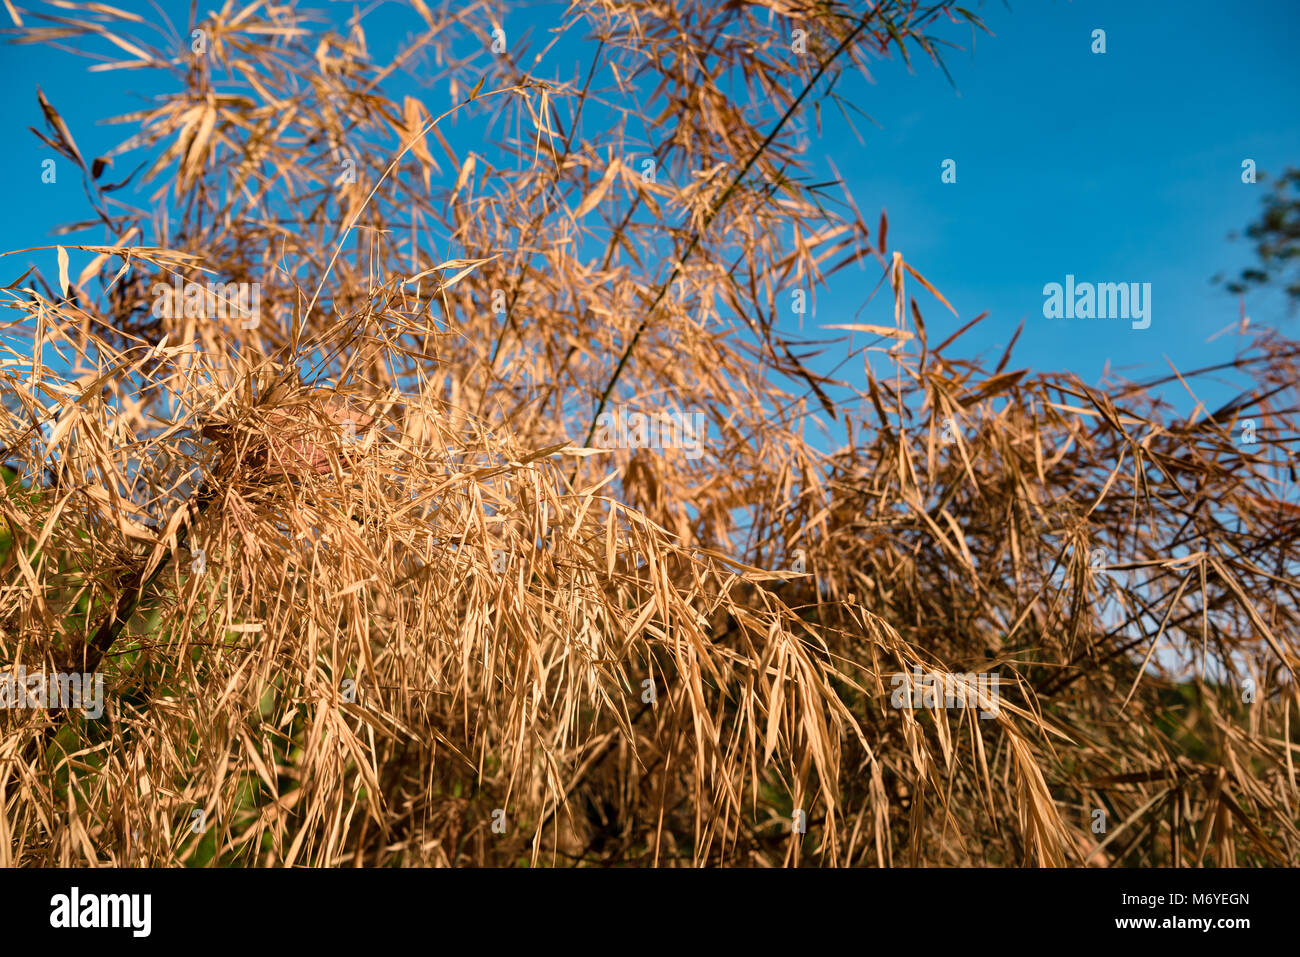 Dry leaves on plants against blue sky Stock Photo